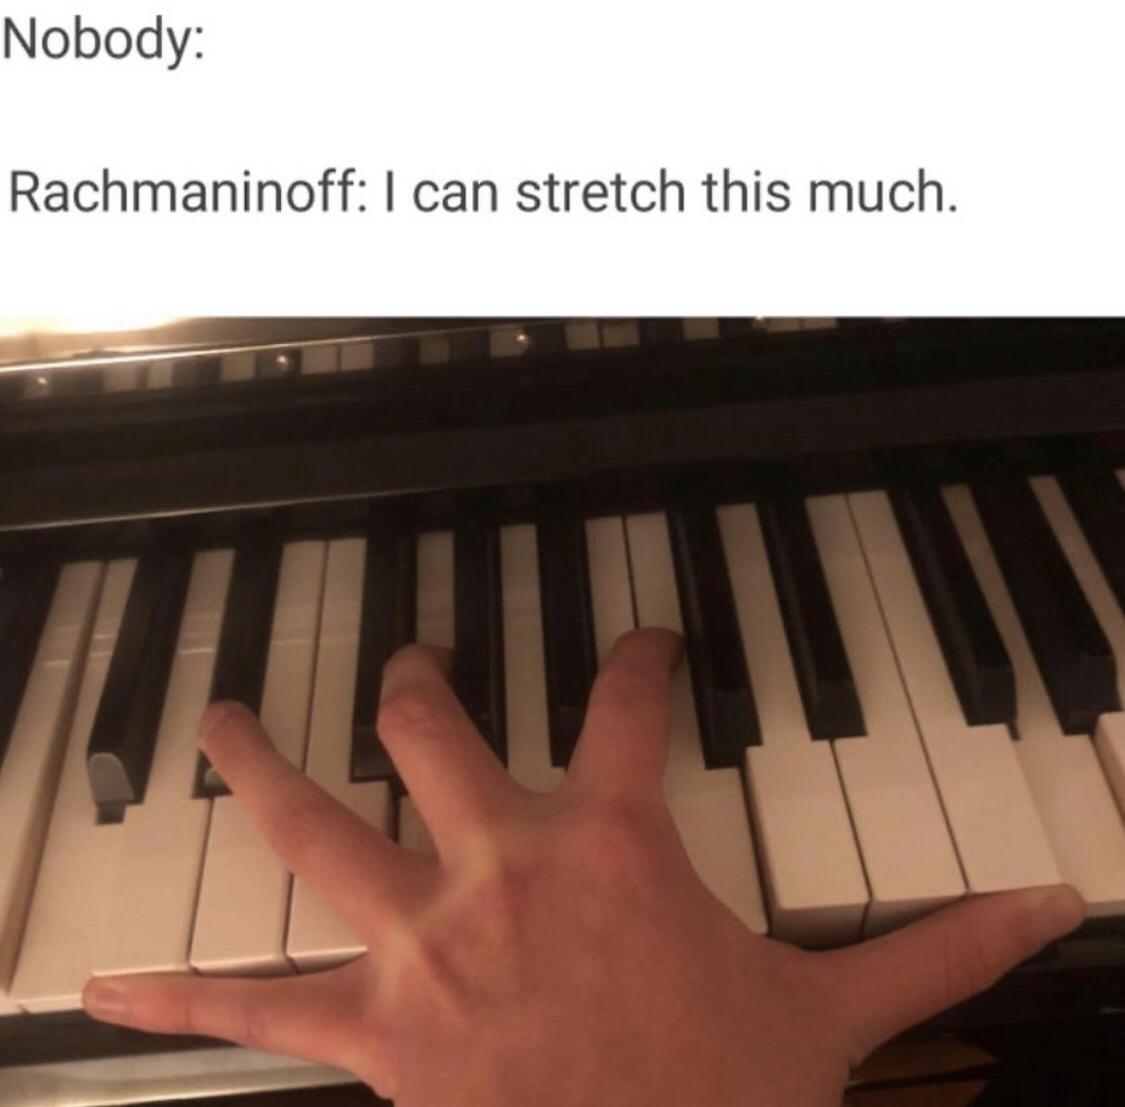 digital piano - Nobody Rachmaninoff I can stretch this much.